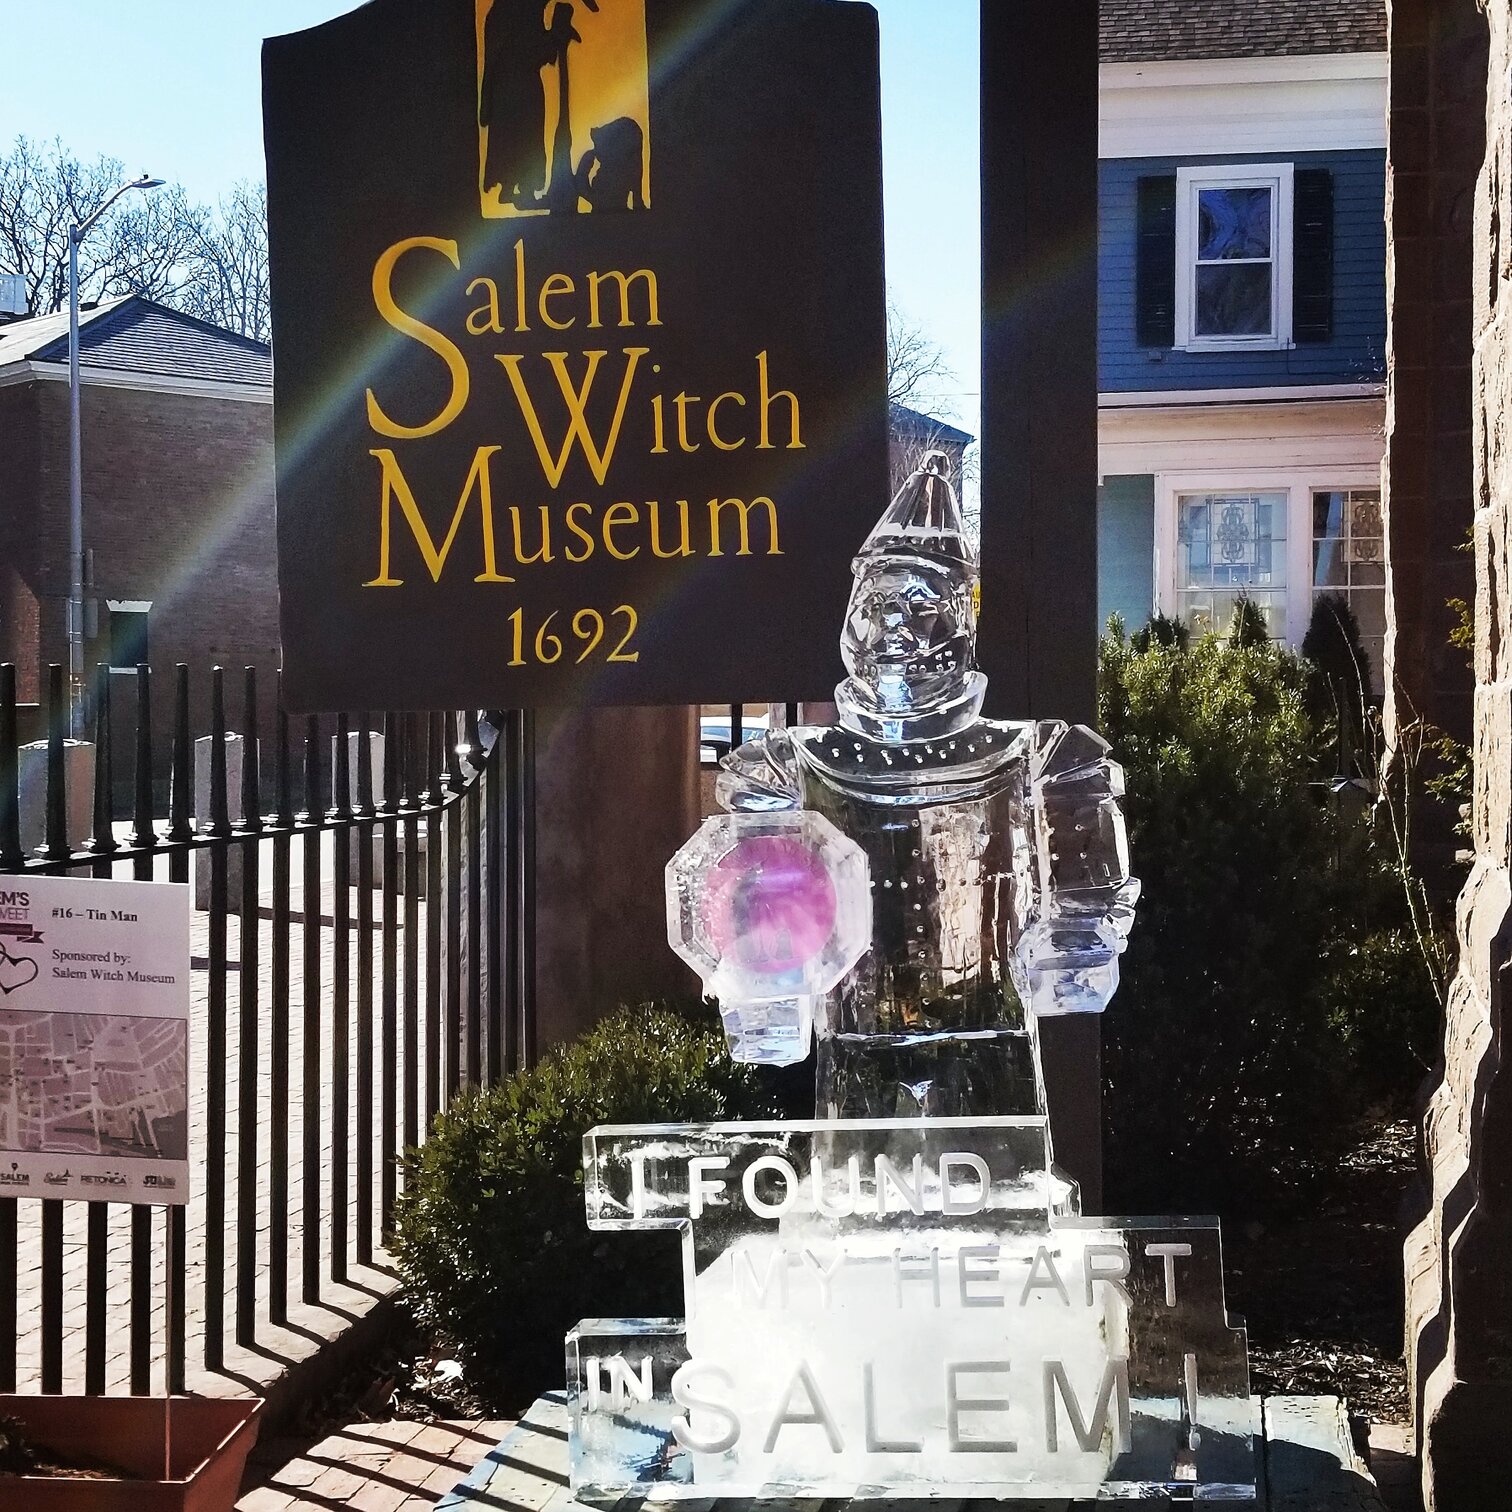 Romantic things to do in Salem, MA by season